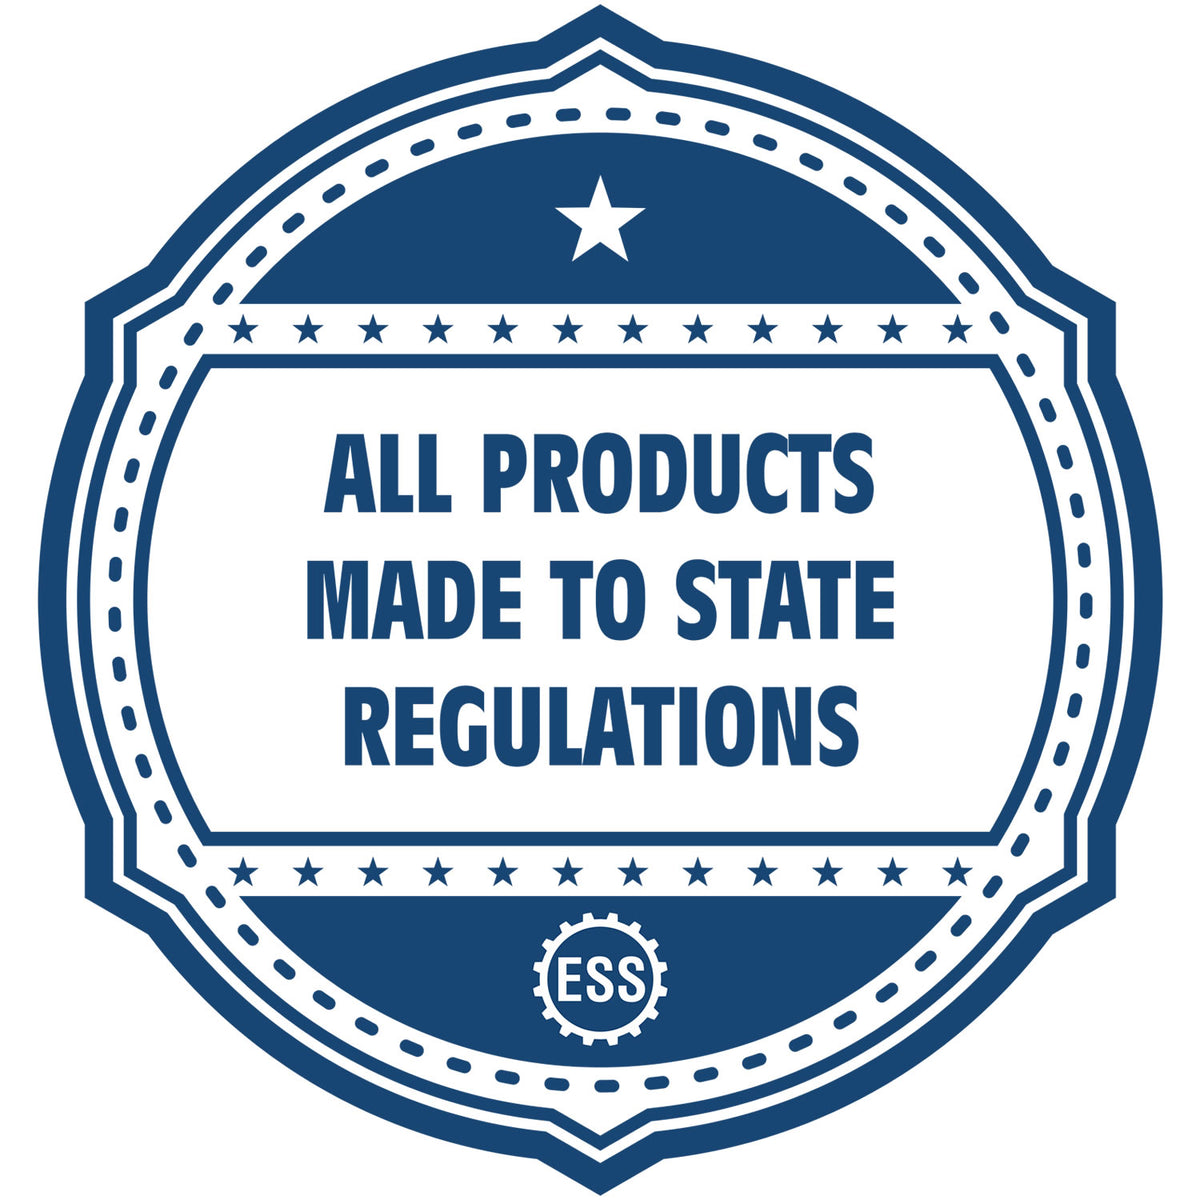 An icon or badge element for the Soft Pocket Kansas Landscape Architect Embosser showing that this product is made in compliance with state regulations.